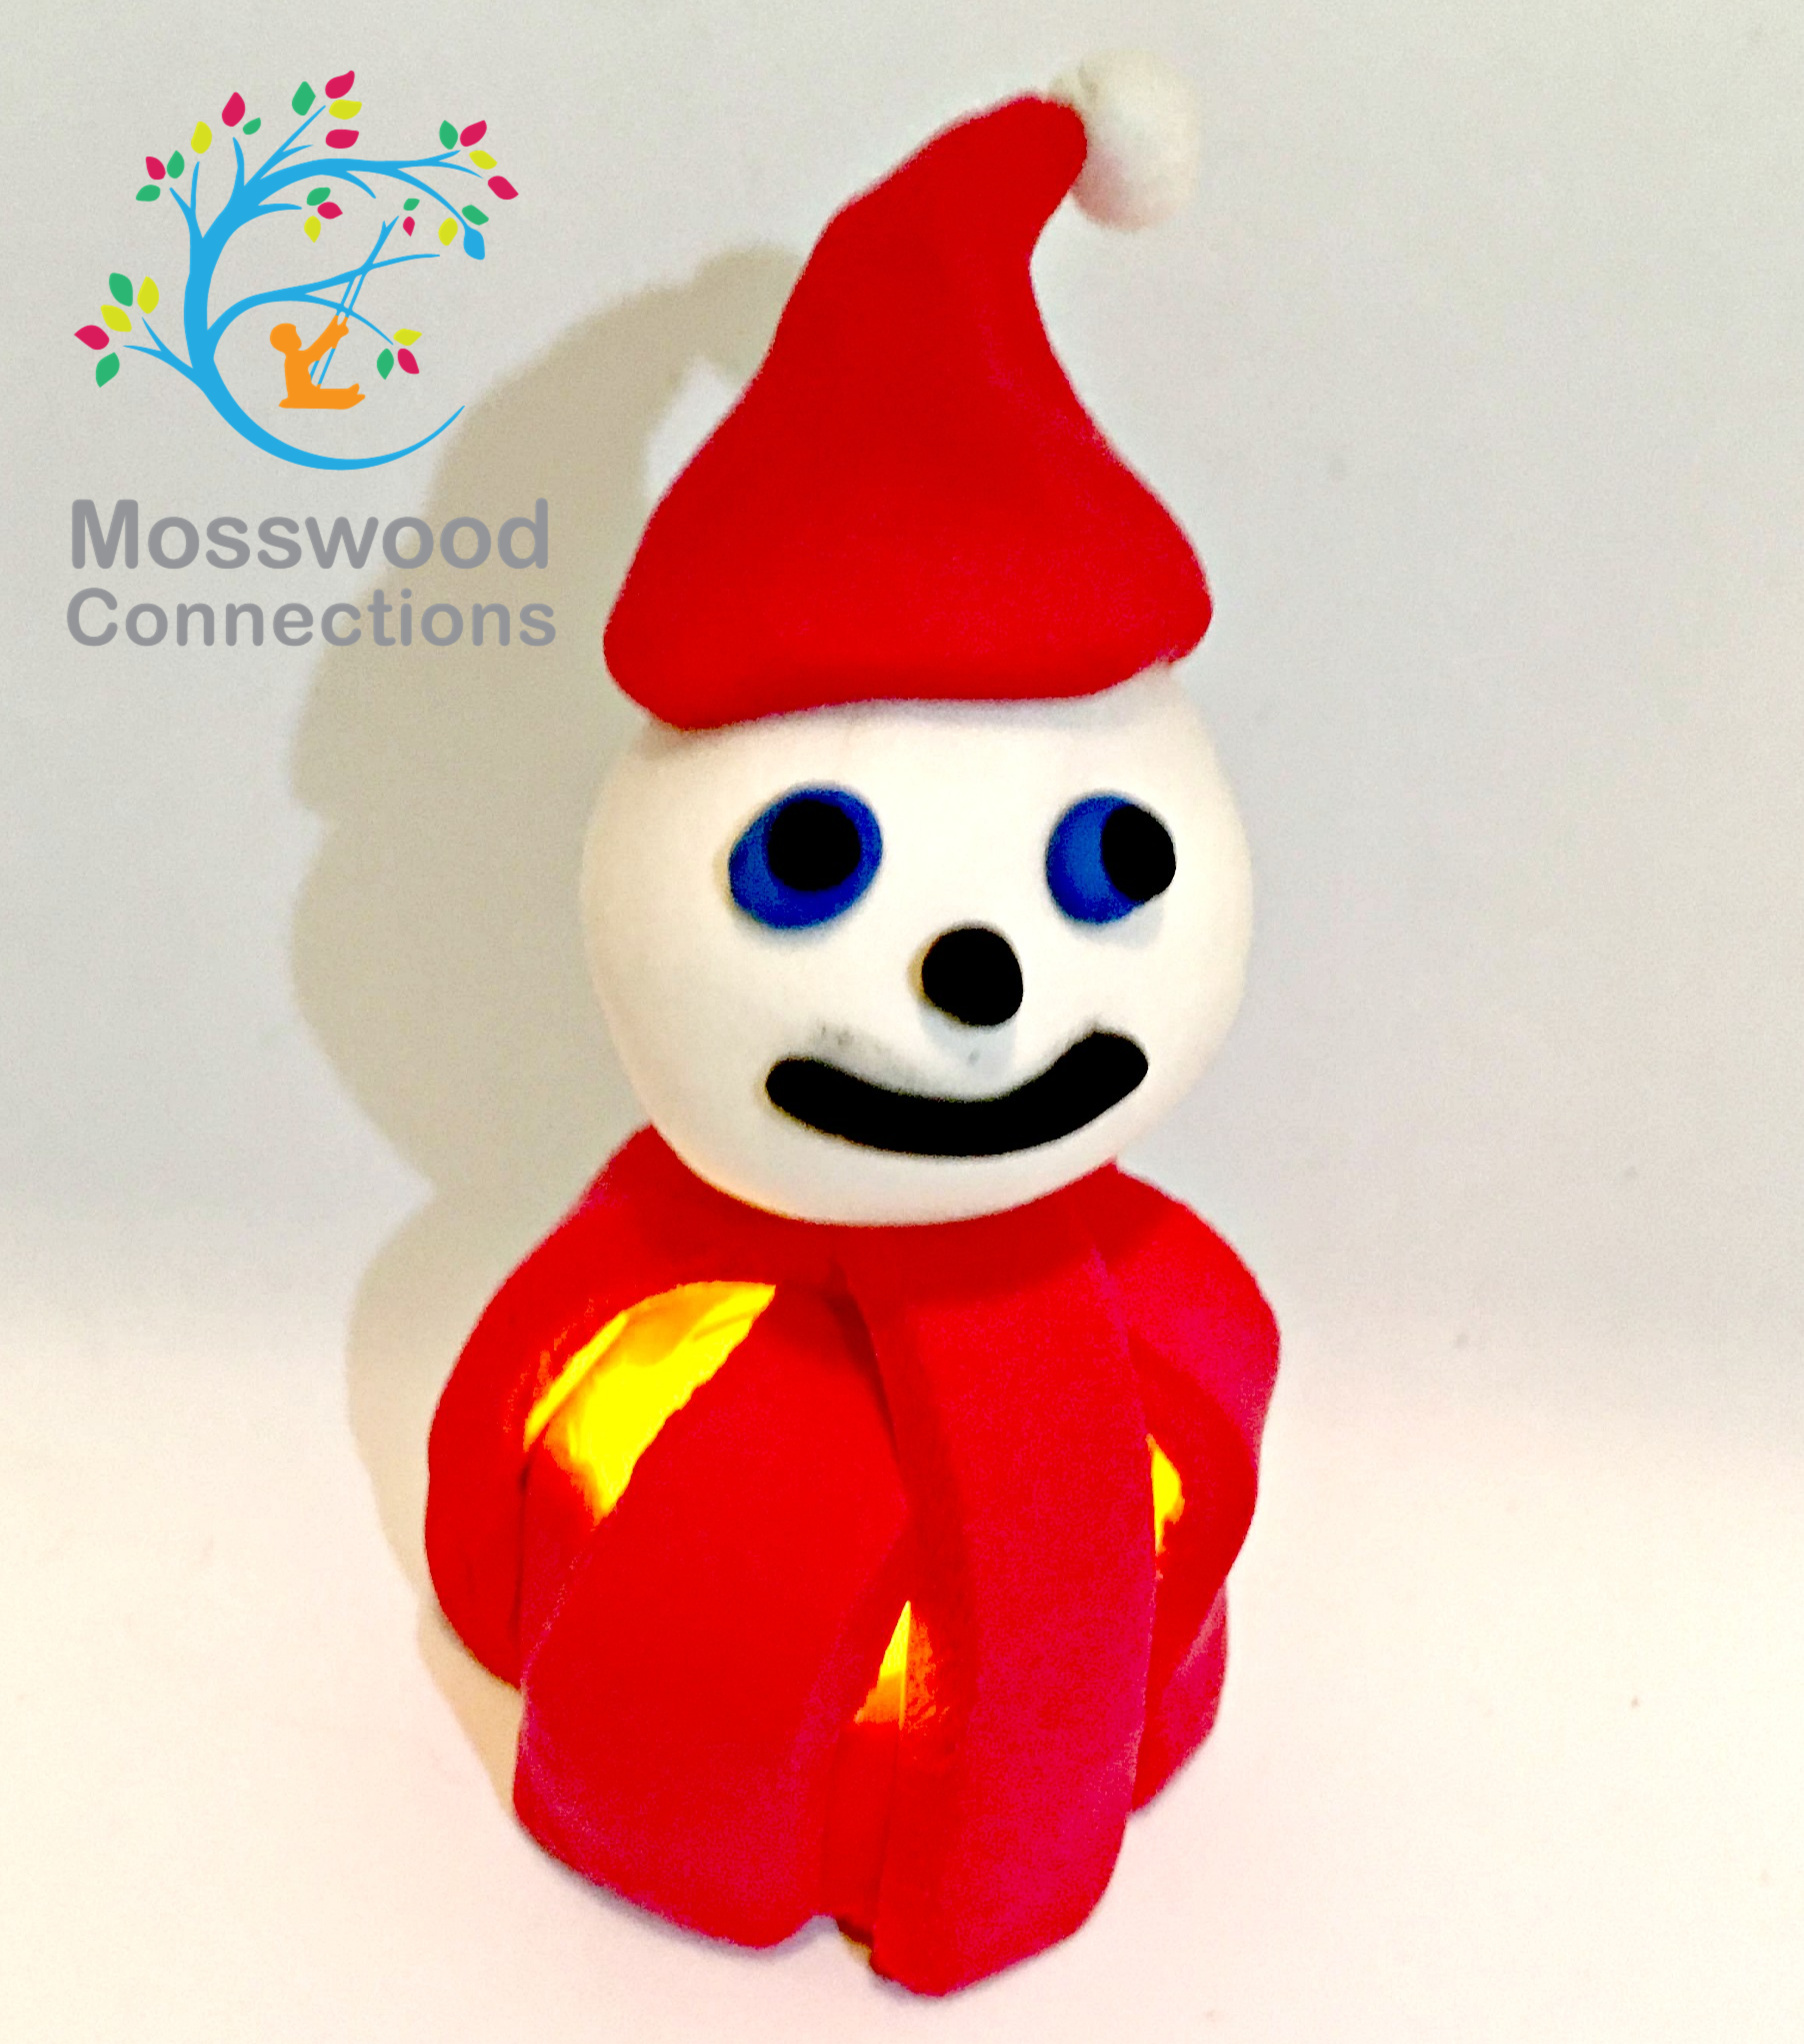 Lighting Up the Holidays With Kid-Made Ornaments #mosswoodconnections #ornaments #kid-made #holidays 